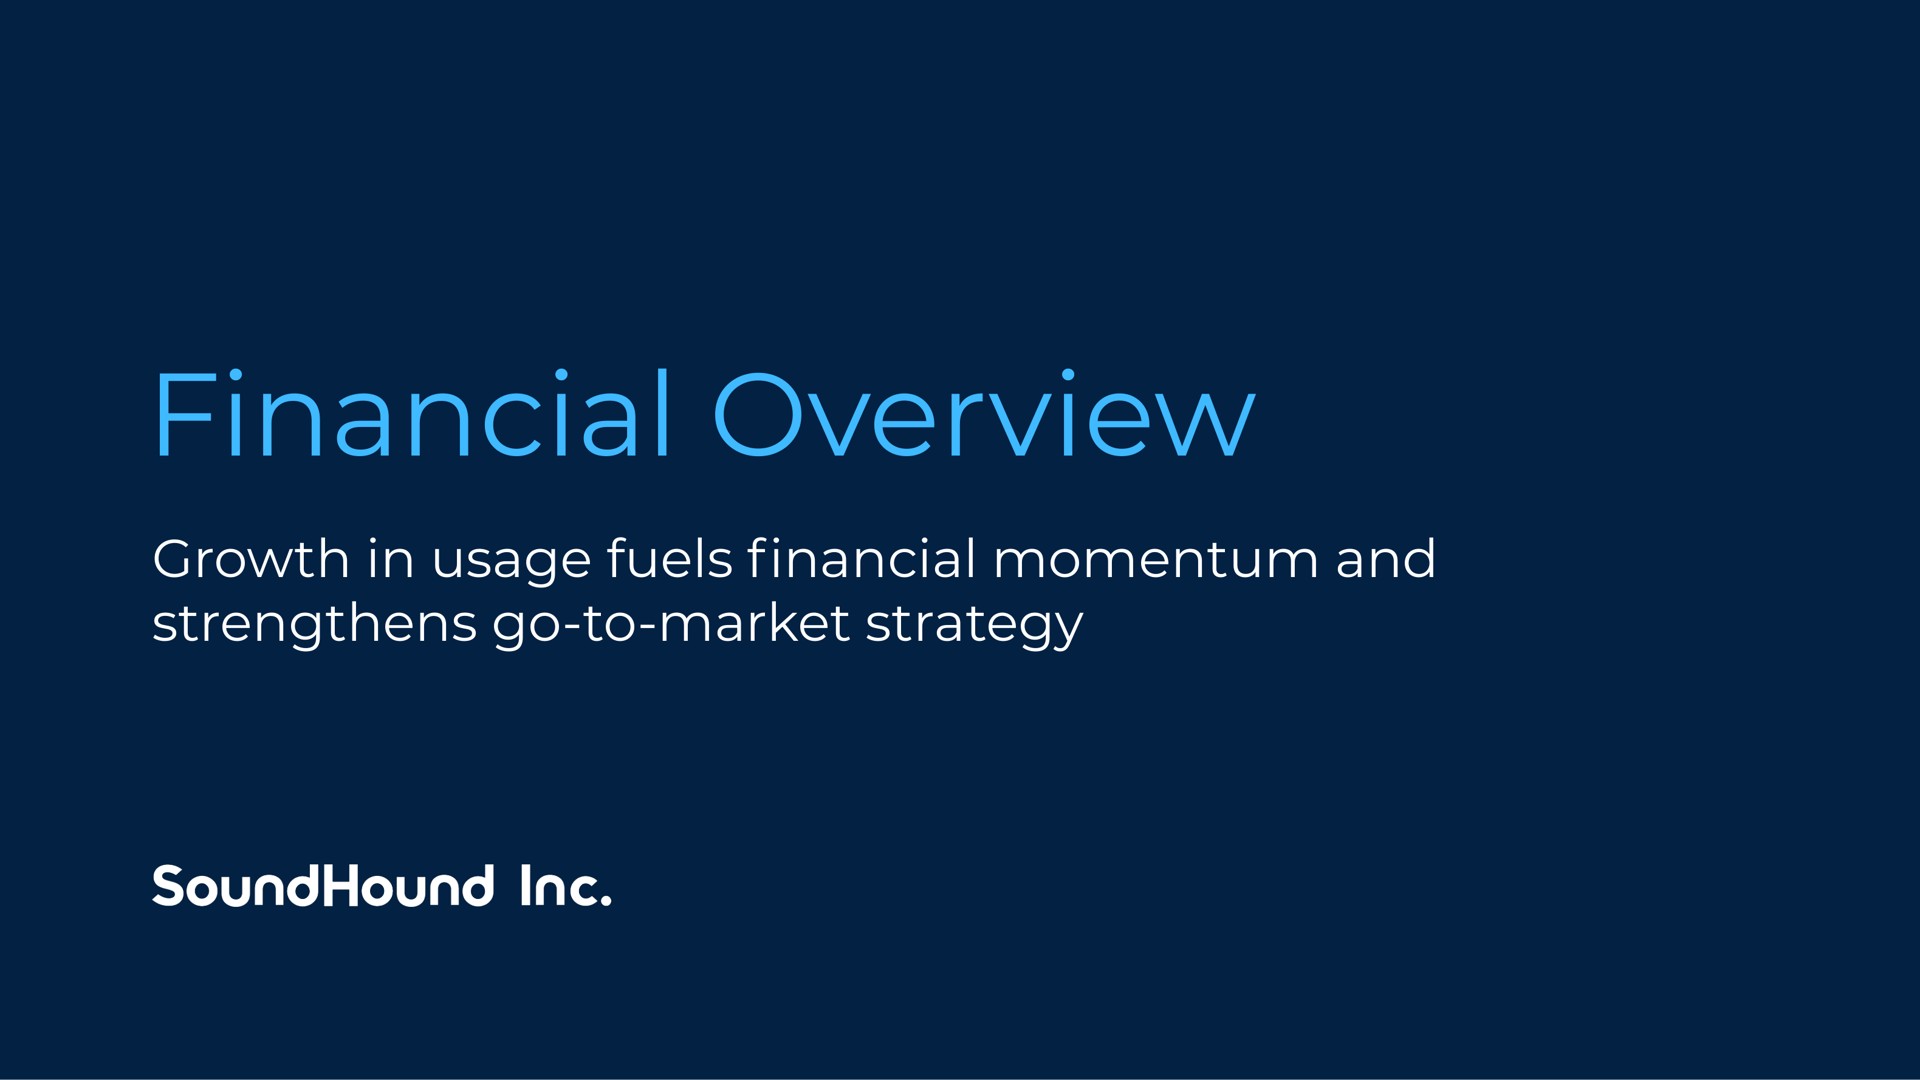 financial overview growth in usage fuels momentum and strengthens go to market strategy | SoundHound